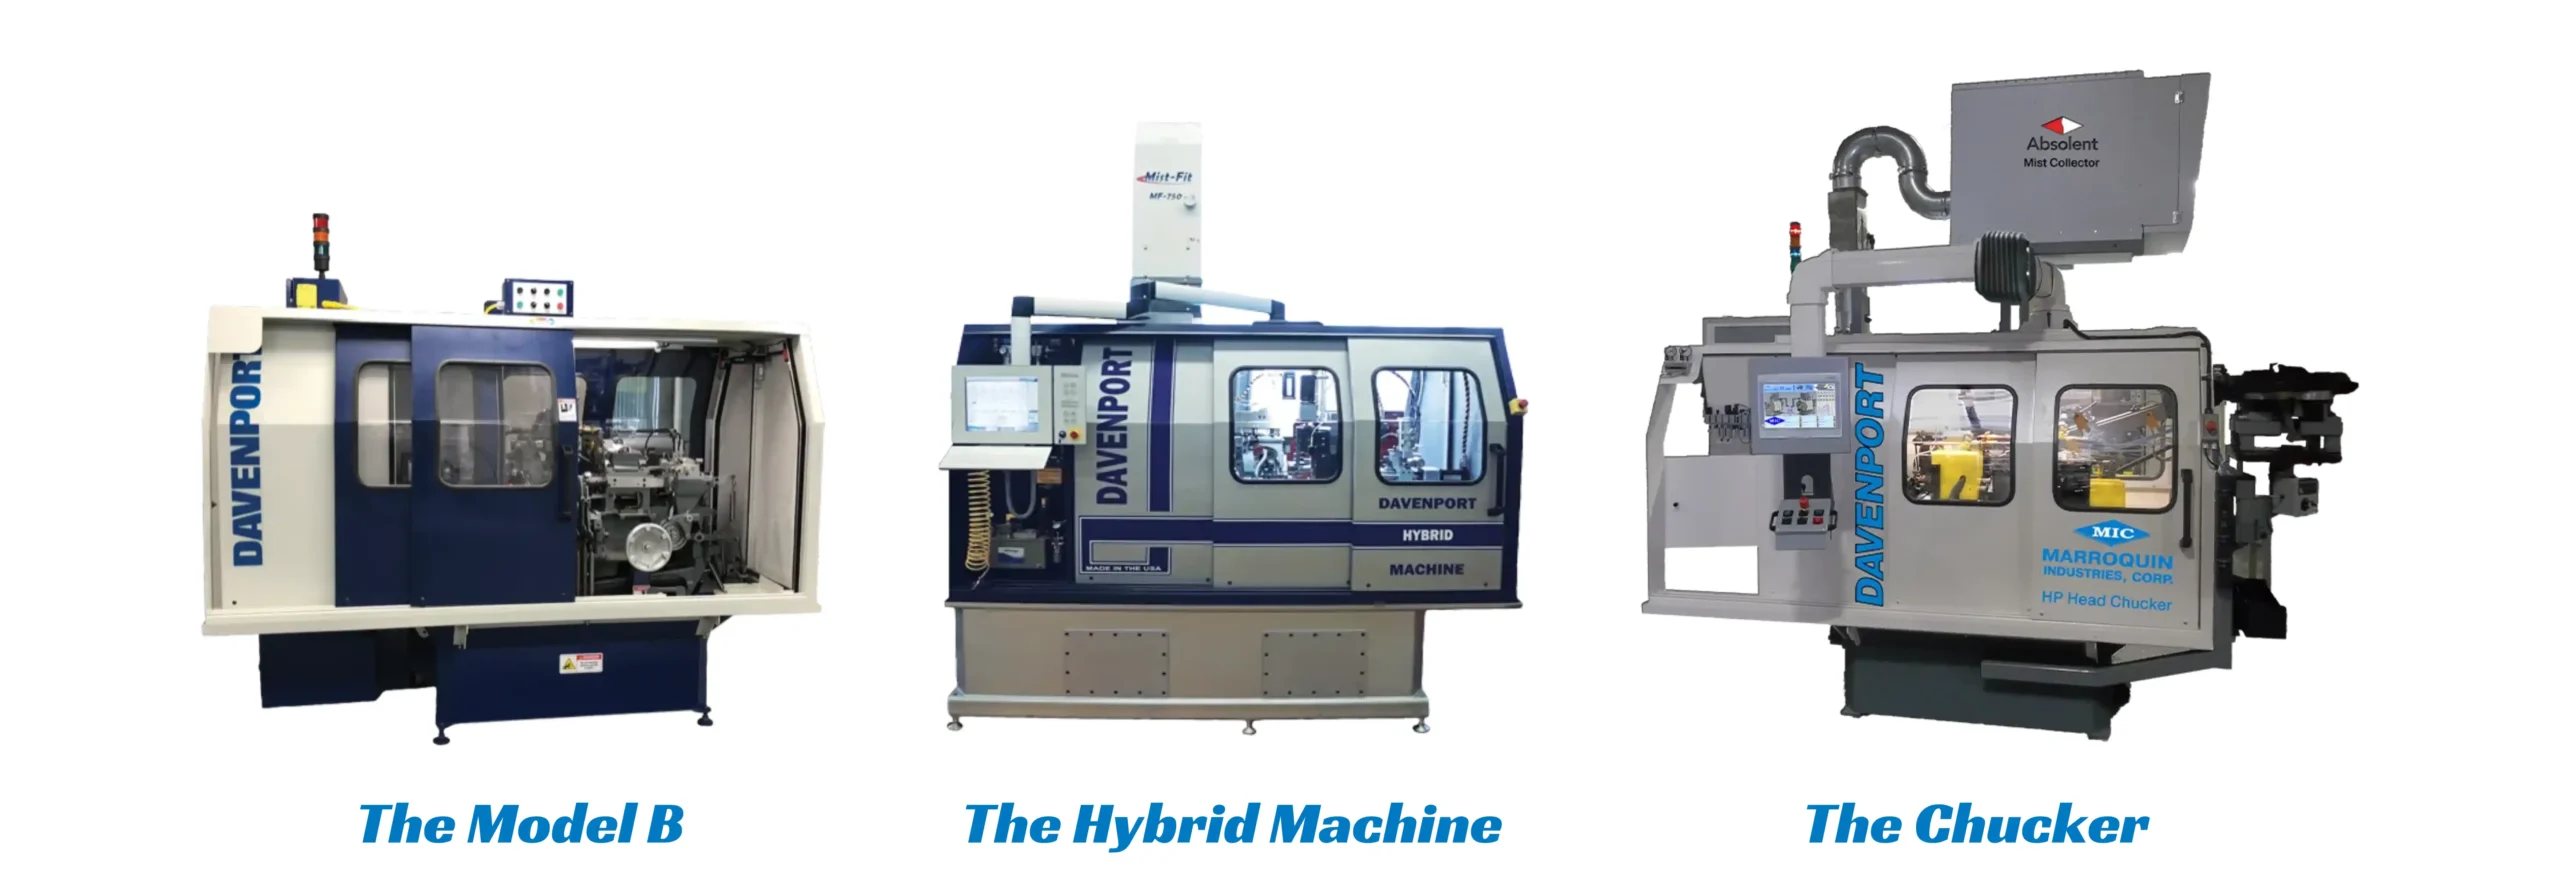 3 multi-spindle screw machines in a row, including the Davenport Model B, the Davenport Hybrid Machine and the Davenport Chucker.